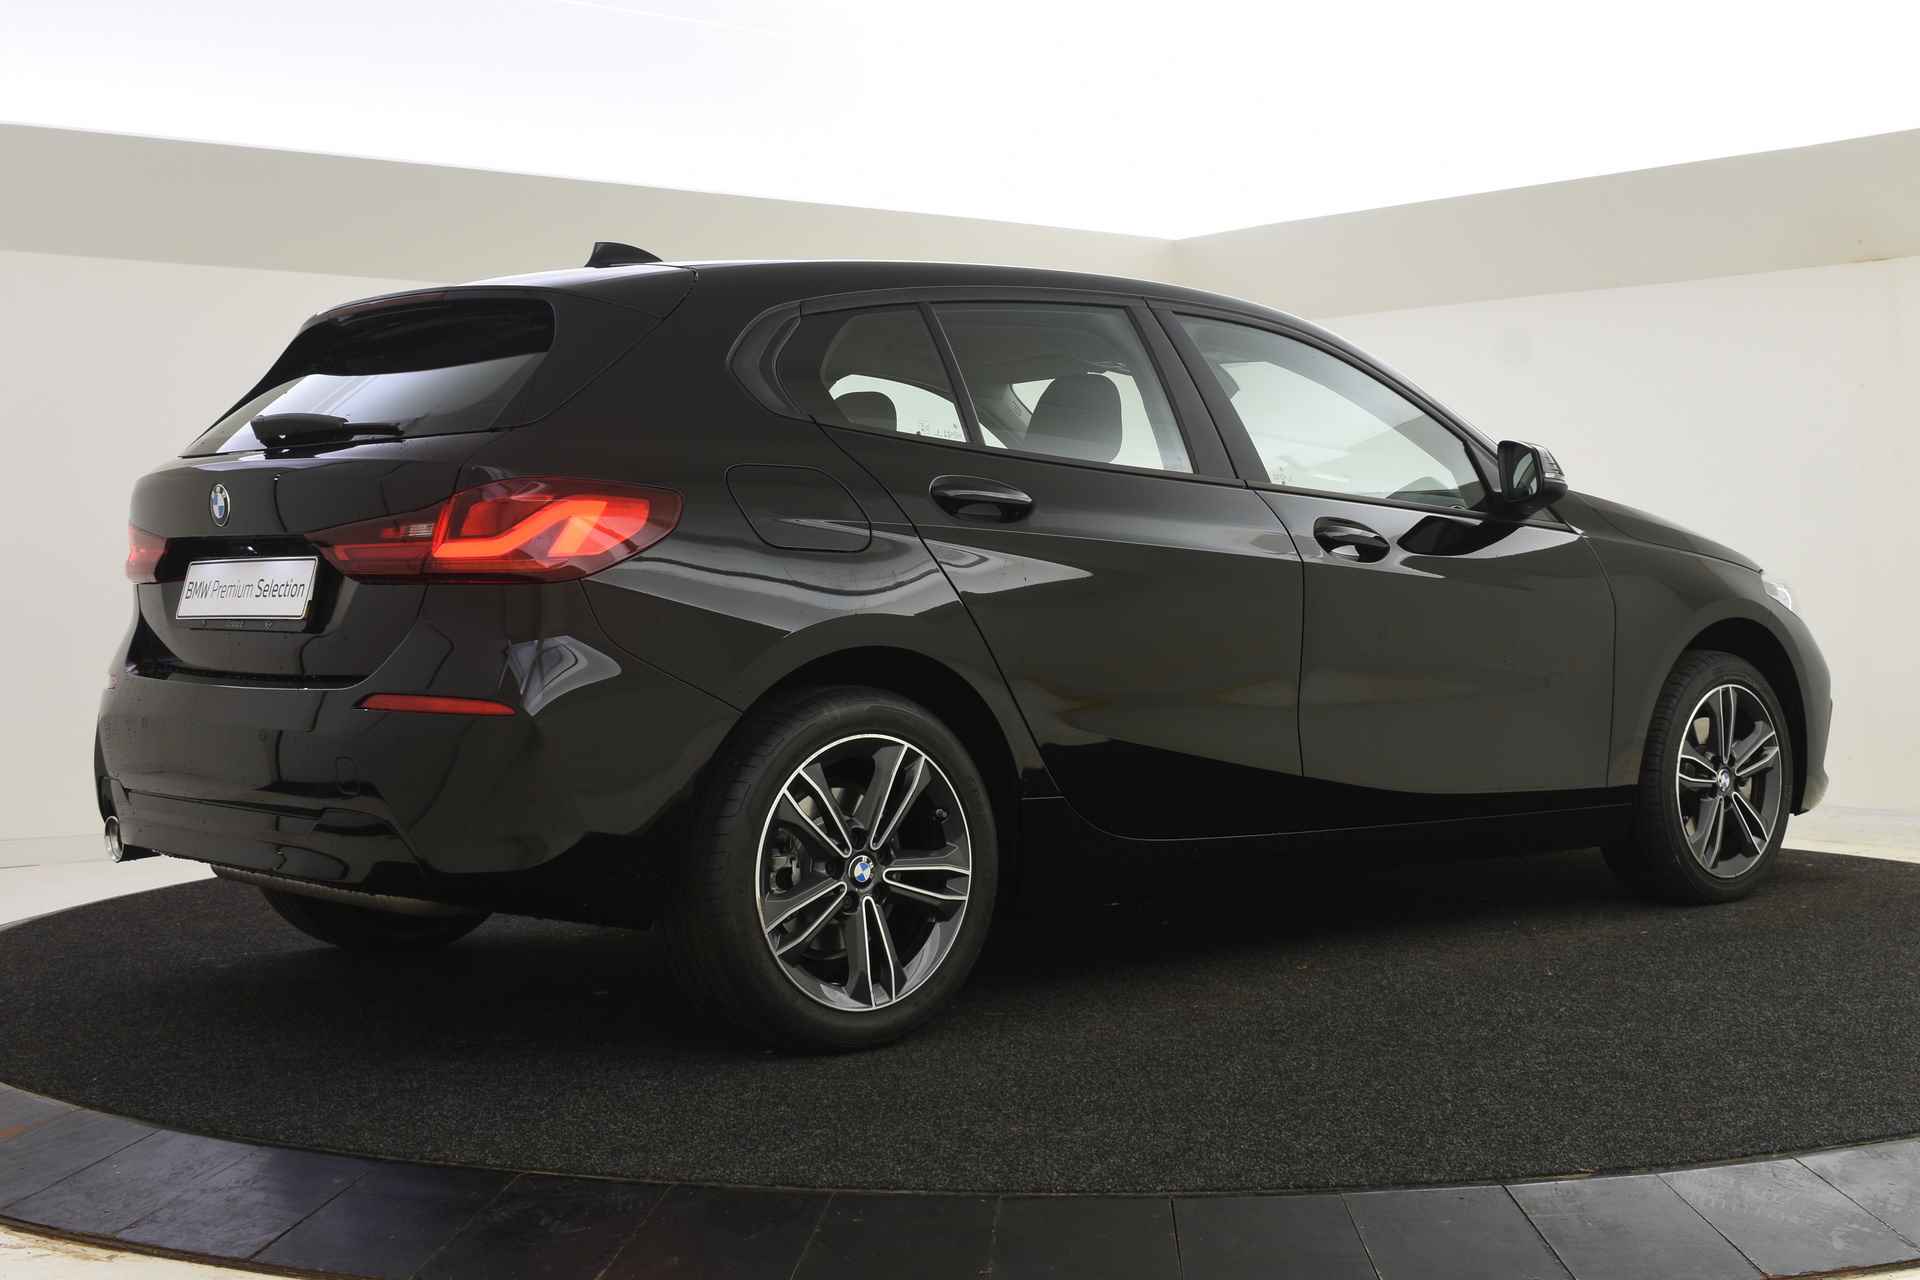 BMW 1-serie 116i Executive / Cruise Control / LED / Live Cockpit Professional / PDC / Multifunctioneel stuurwiel - 7/46